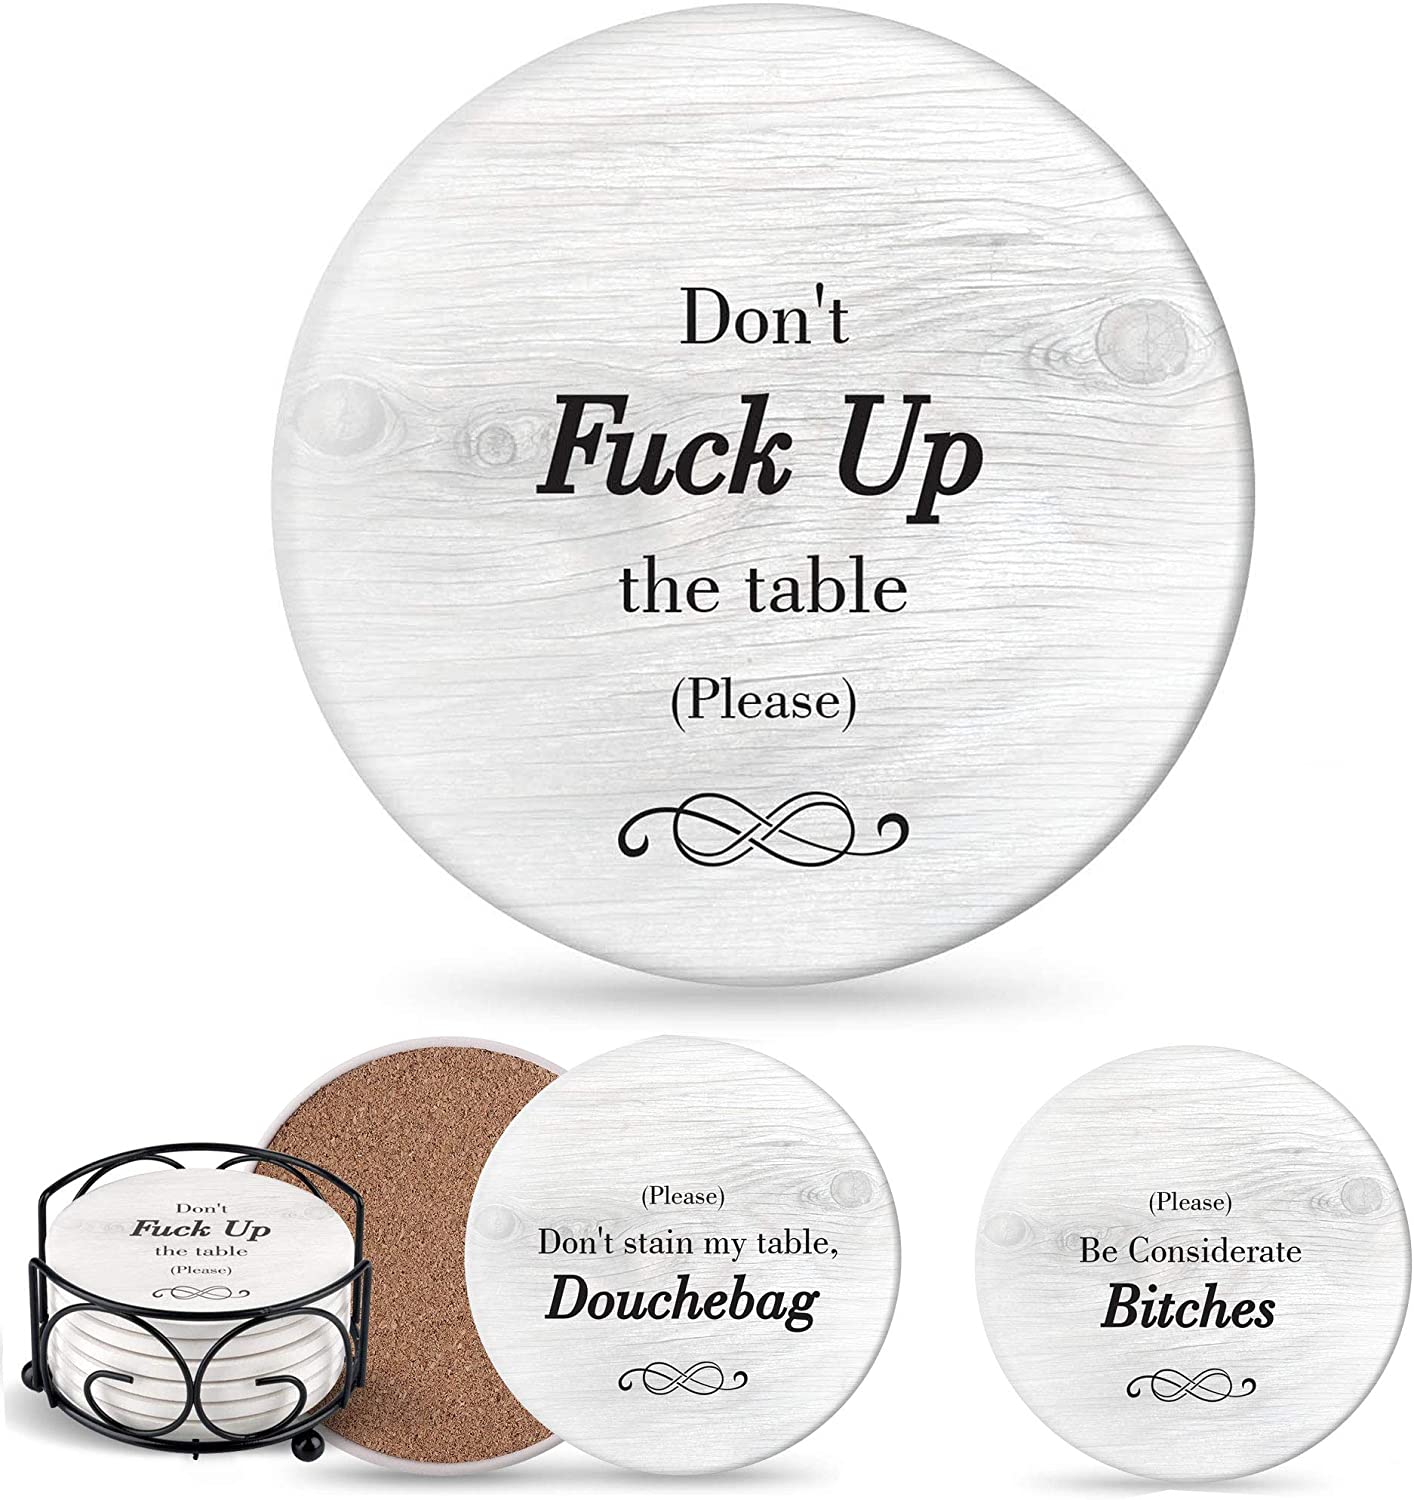 Funny Coasters for Drinks with Holder - Absorbent Drink Coasters Set 6 Pcs - 3 Sayings - Housewarming Gifts for Friends - Men, Women Birthday - Cool Home Decor - Living Room, Kitchen, Bar Decorations